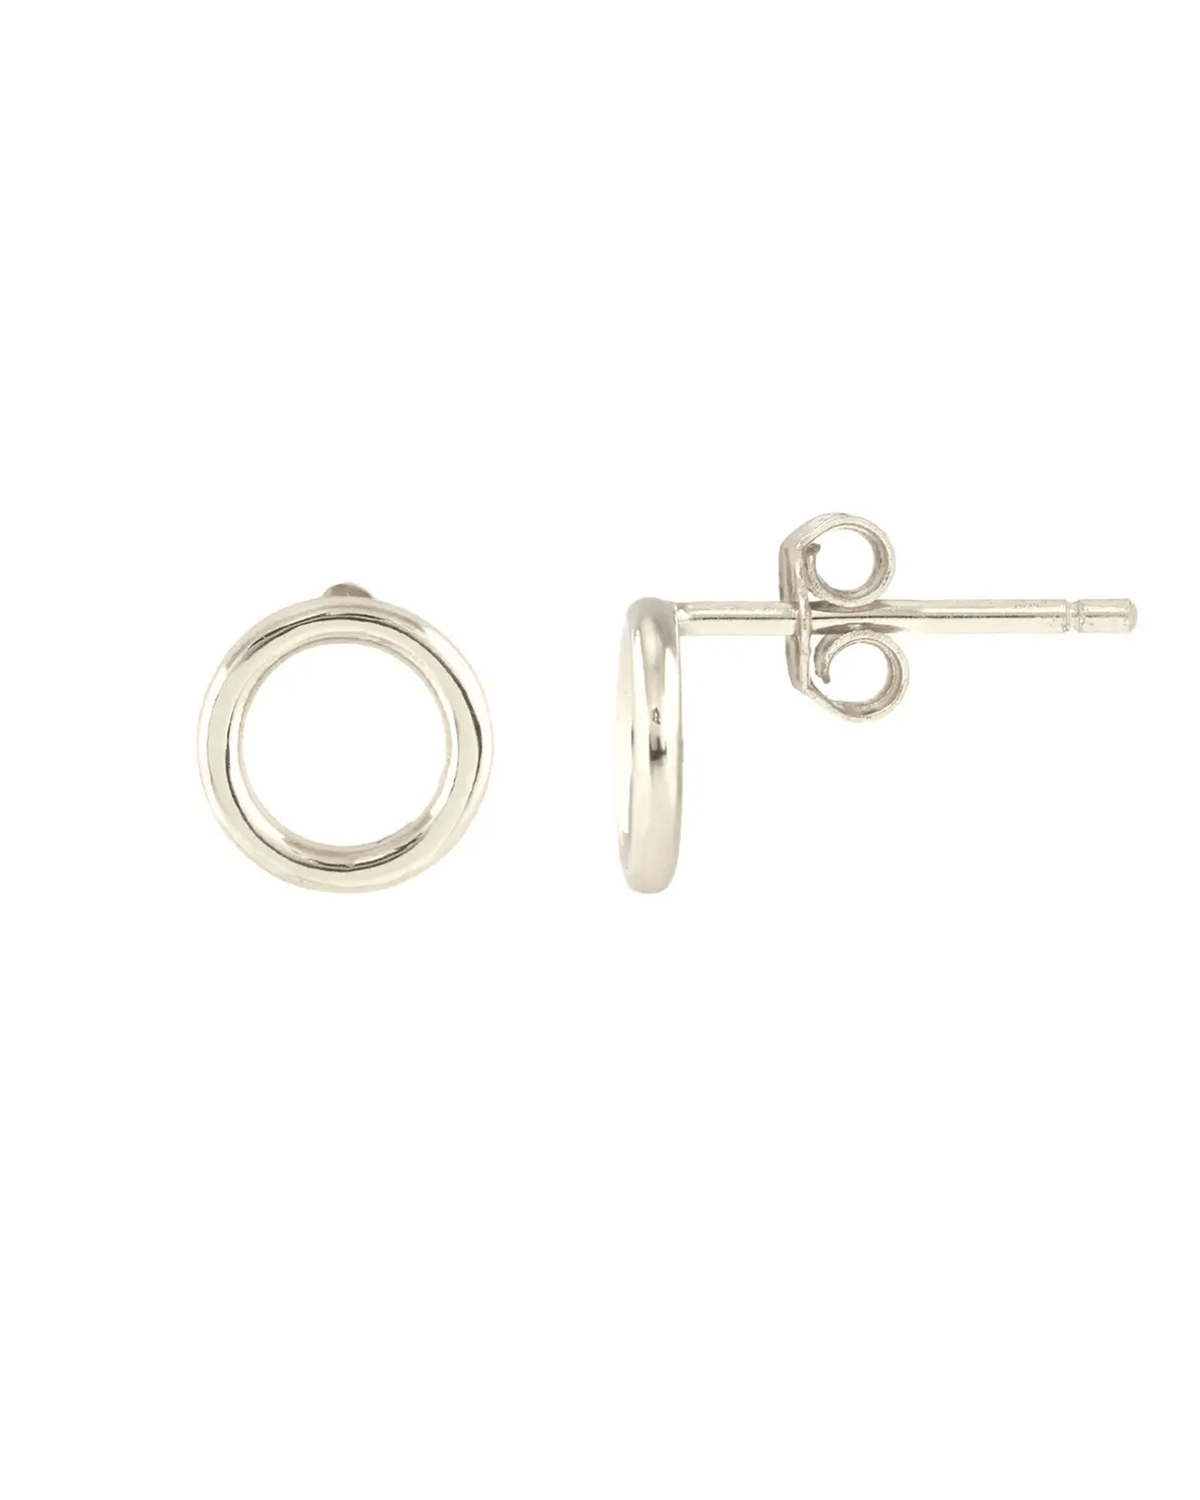 Kris Nations Jewelry Sterling Silver Circle Outline Stud Earrings in Sterling Silver